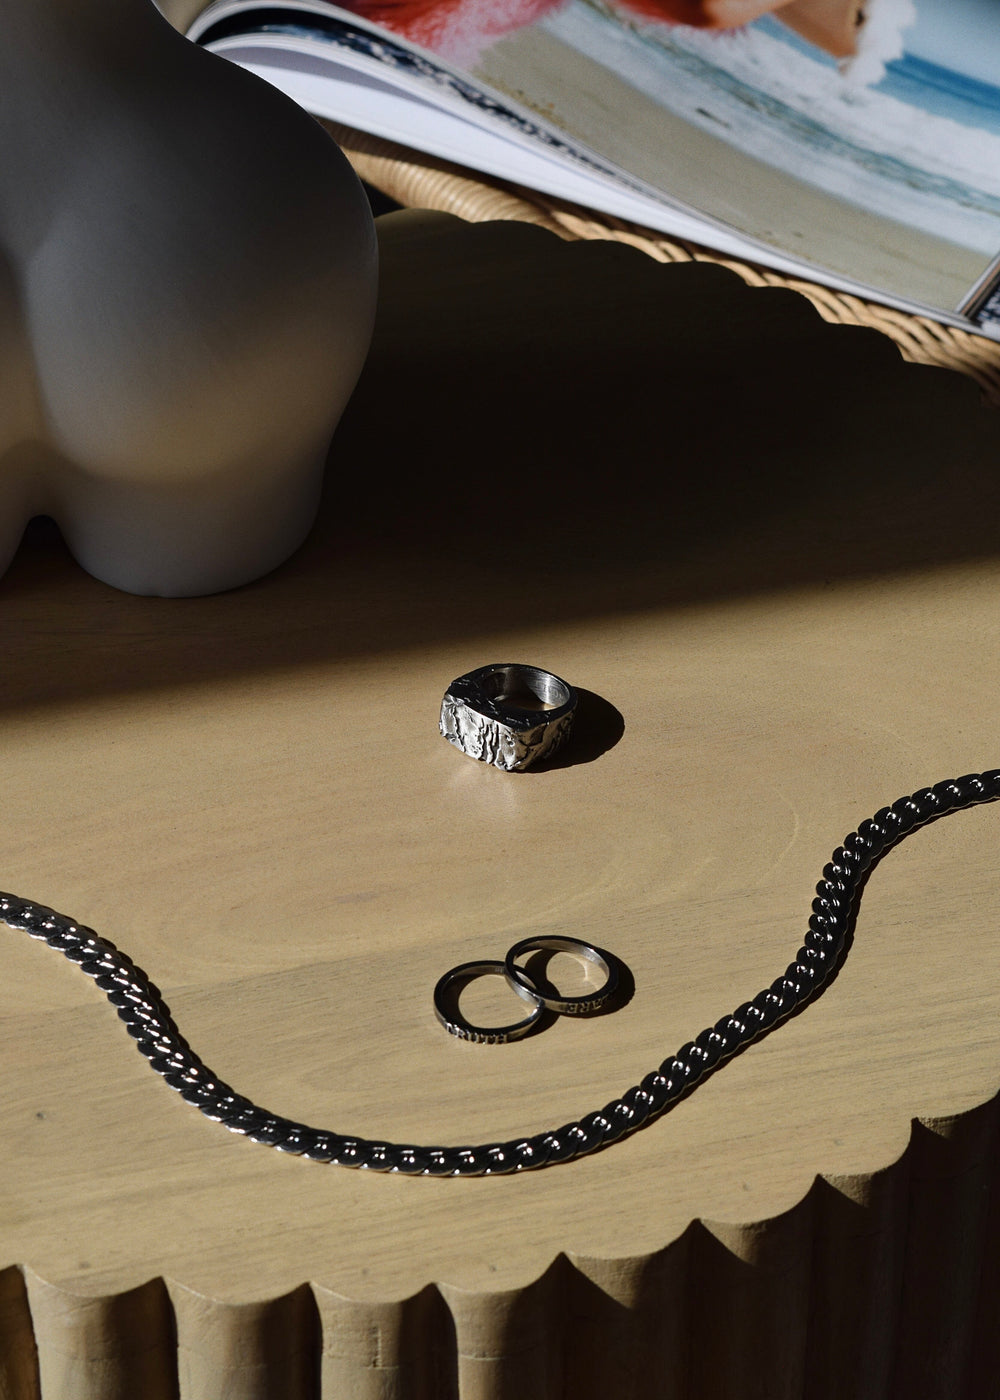 A silver DIVON ring sits on top of a wooden table.